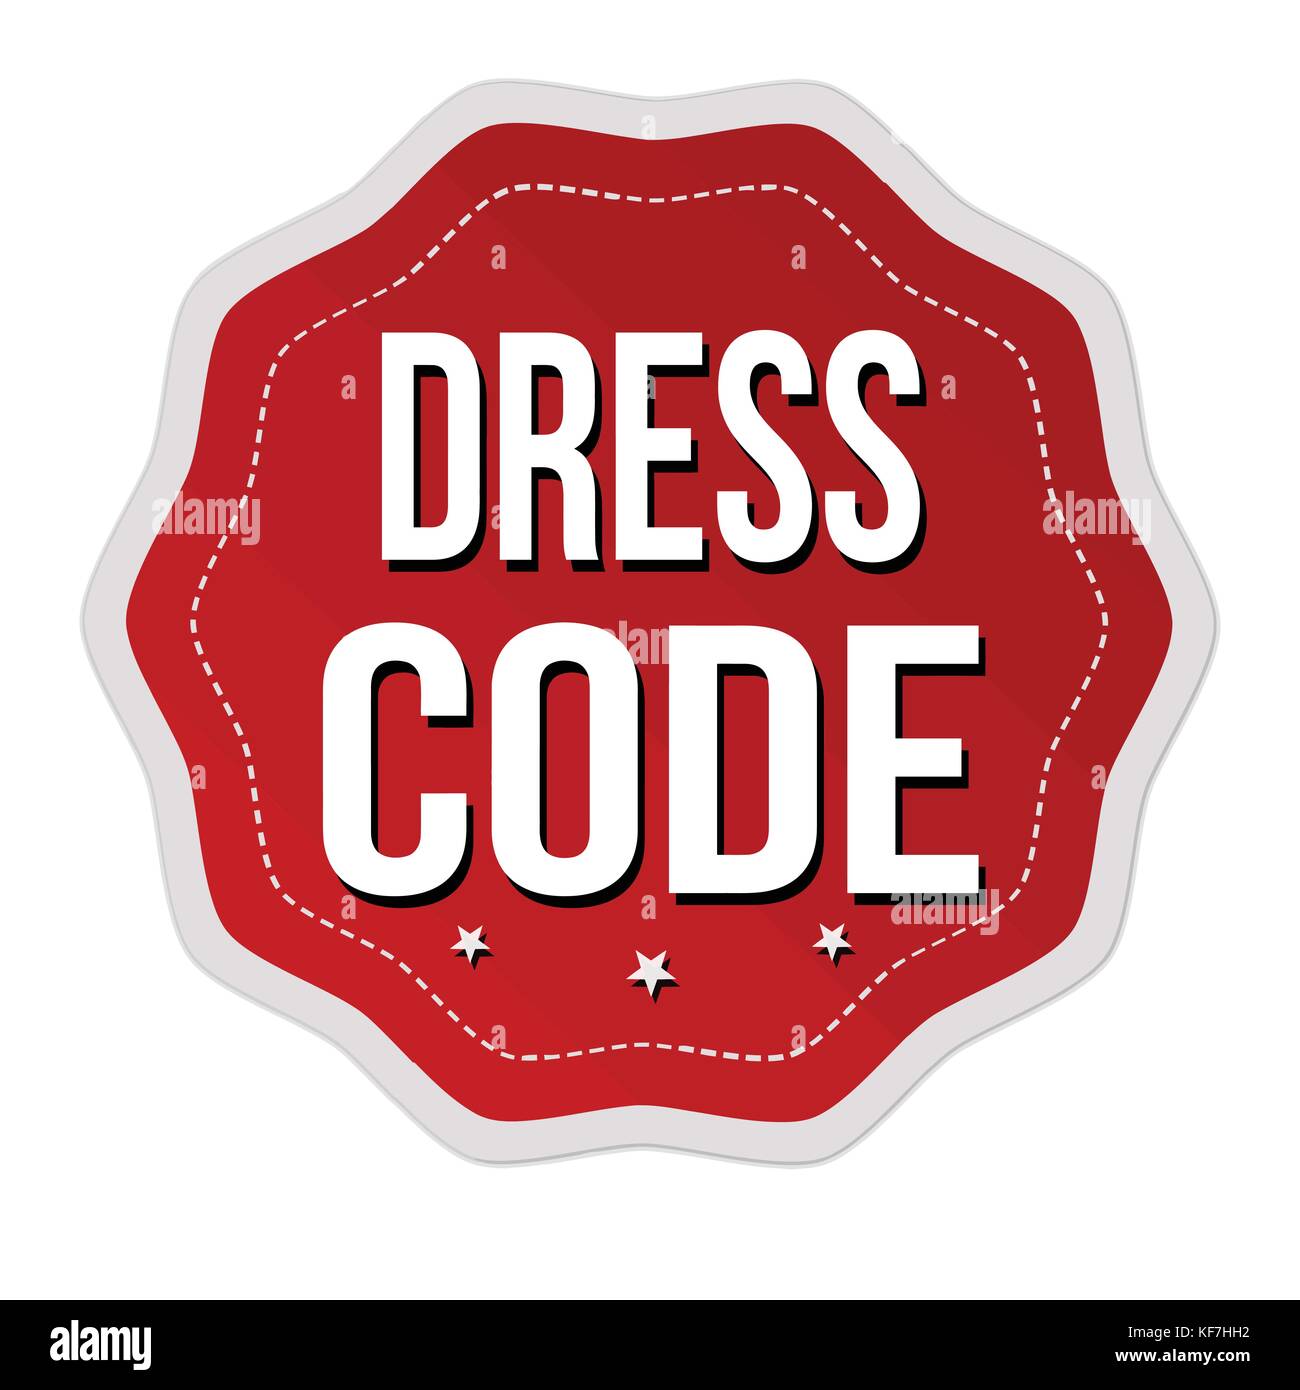 Dress code label or sticker on white background, vector